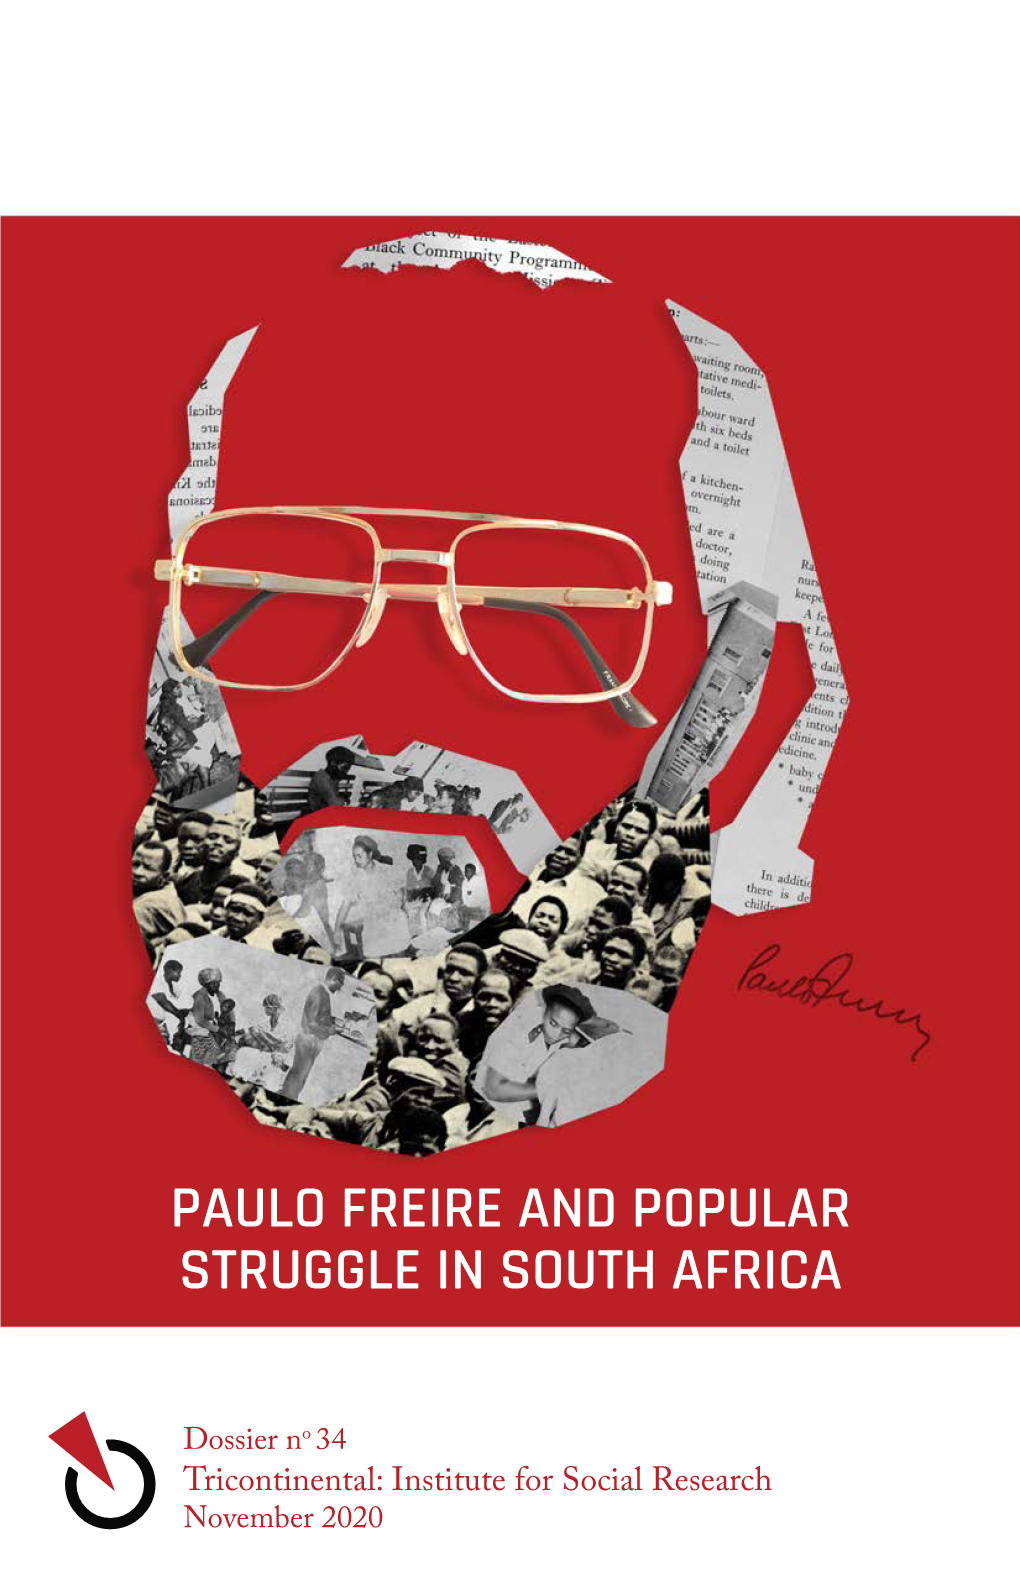 Paulo Freire and Popular Struggle in South Africa